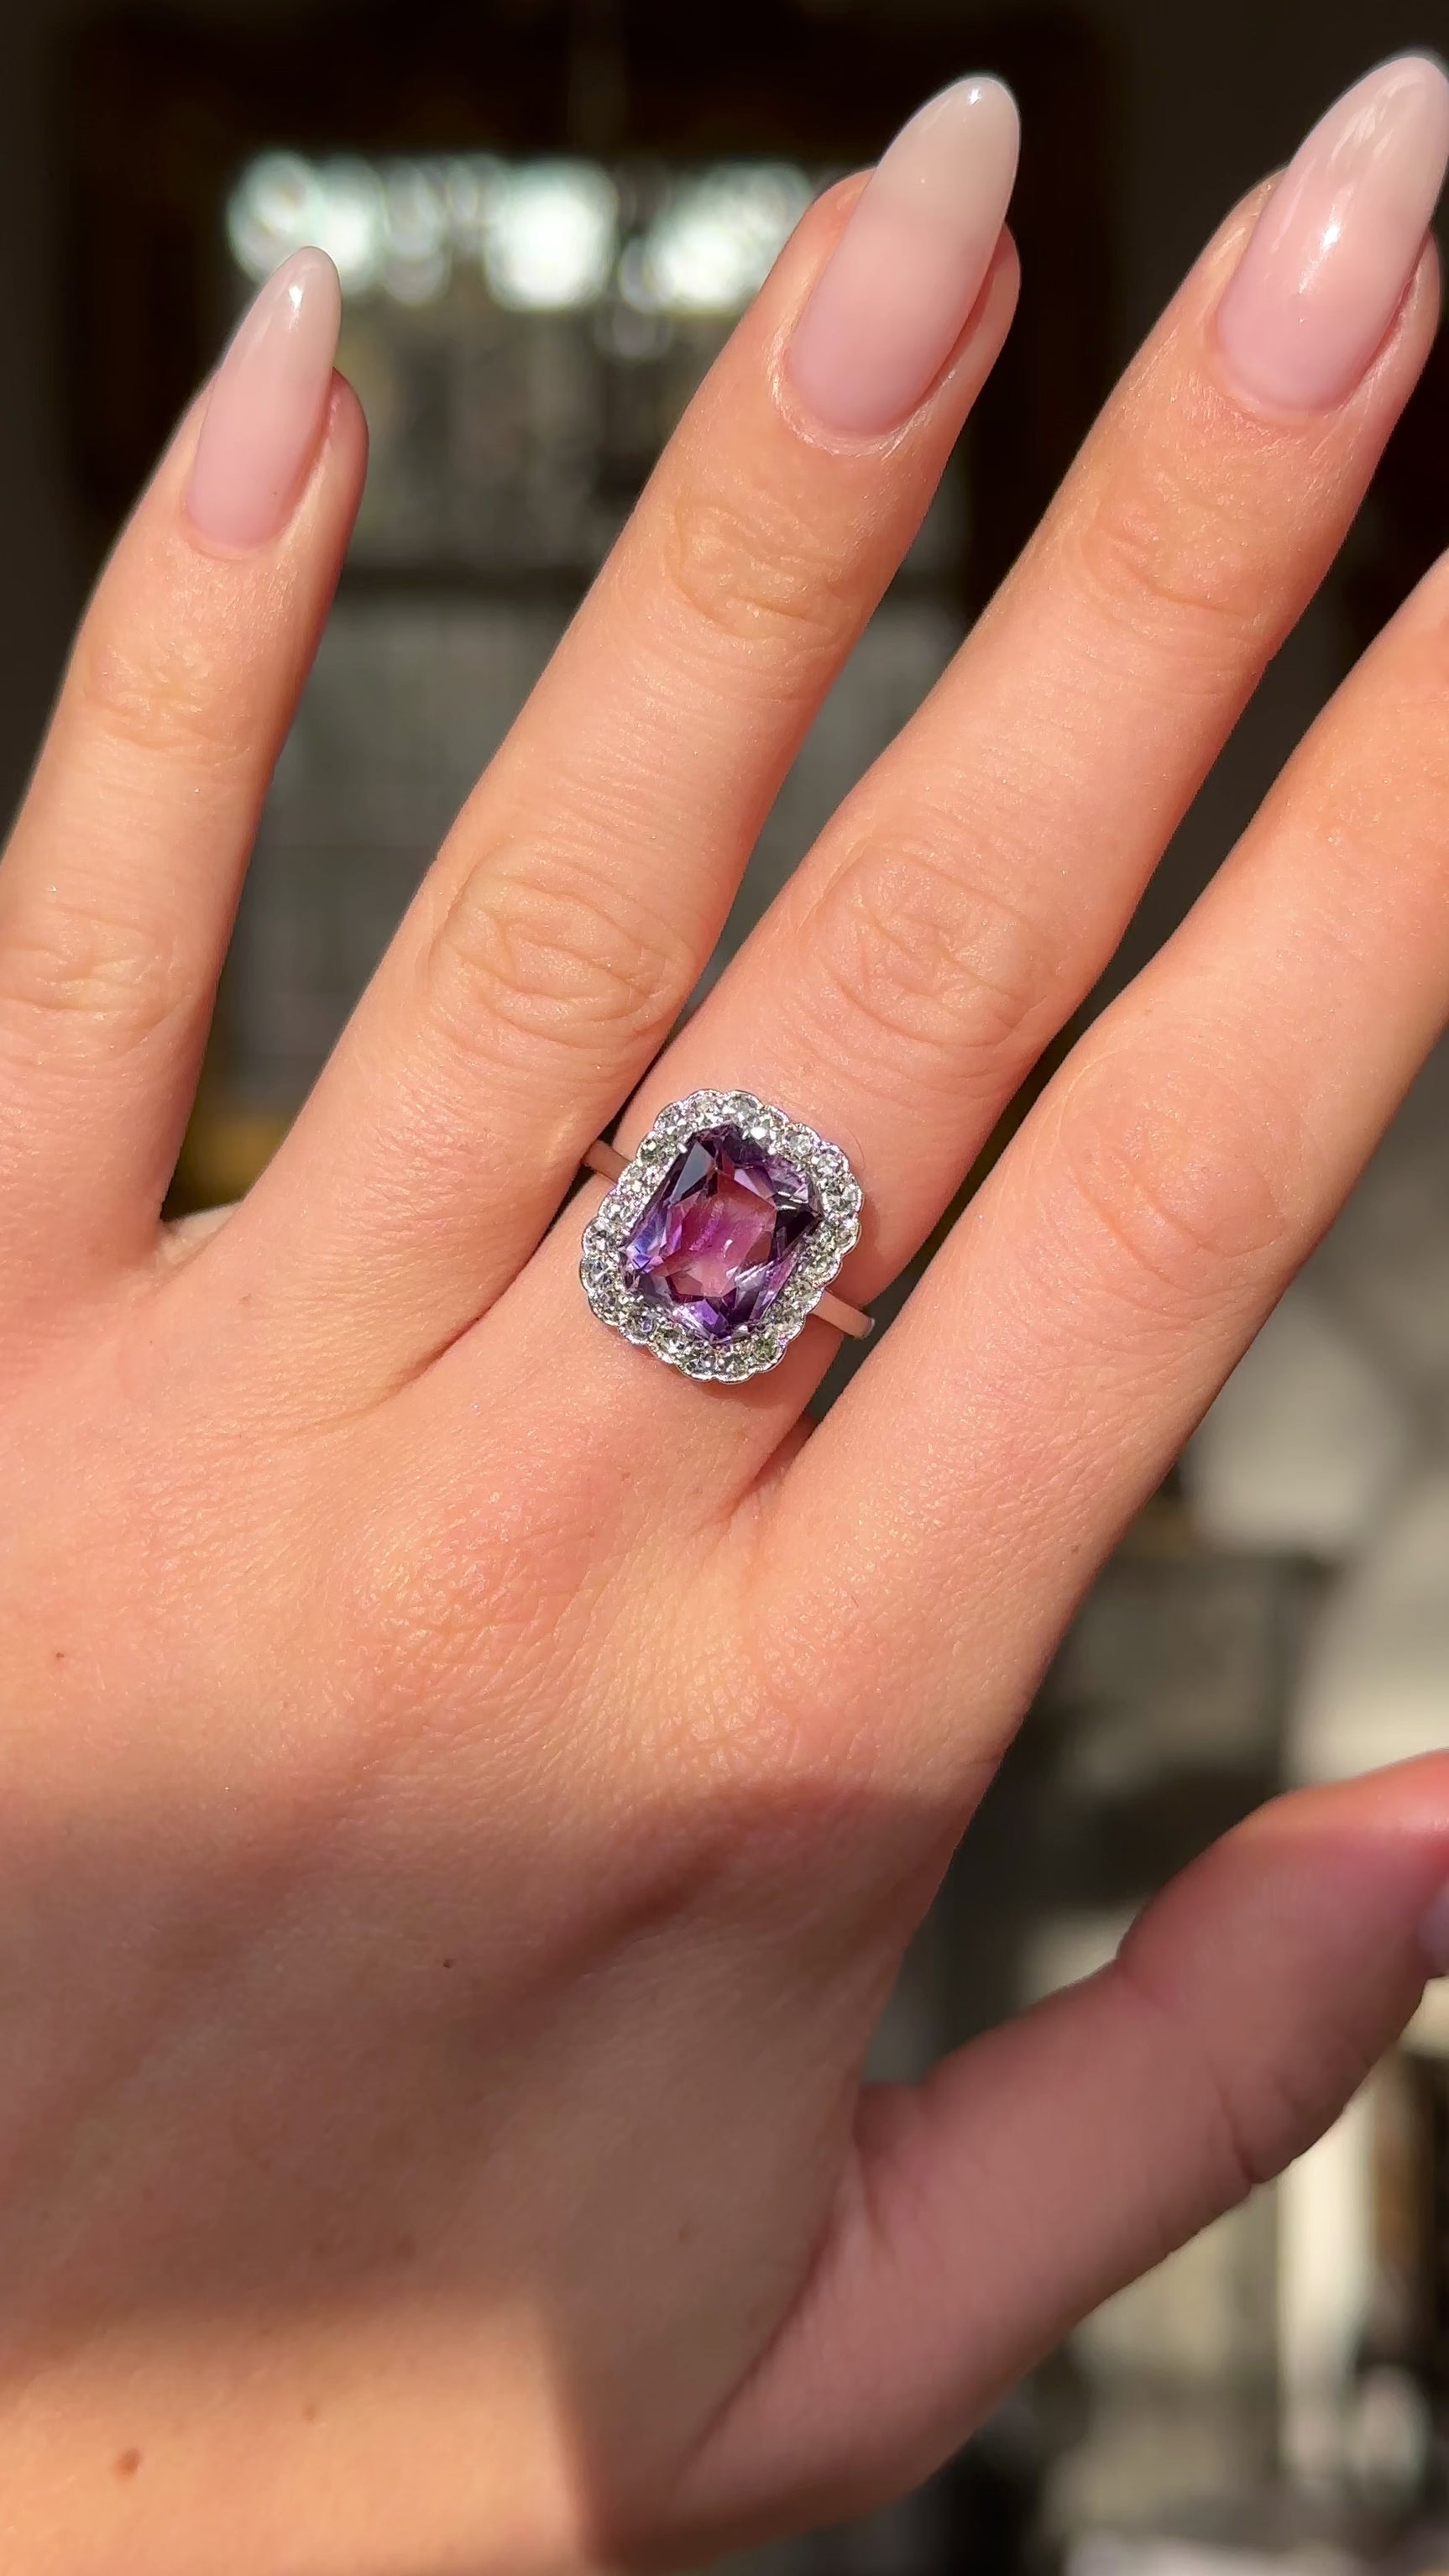 antique belle epoque amethyst and diamond cluster ring worn on hand and moved around to give perspective.